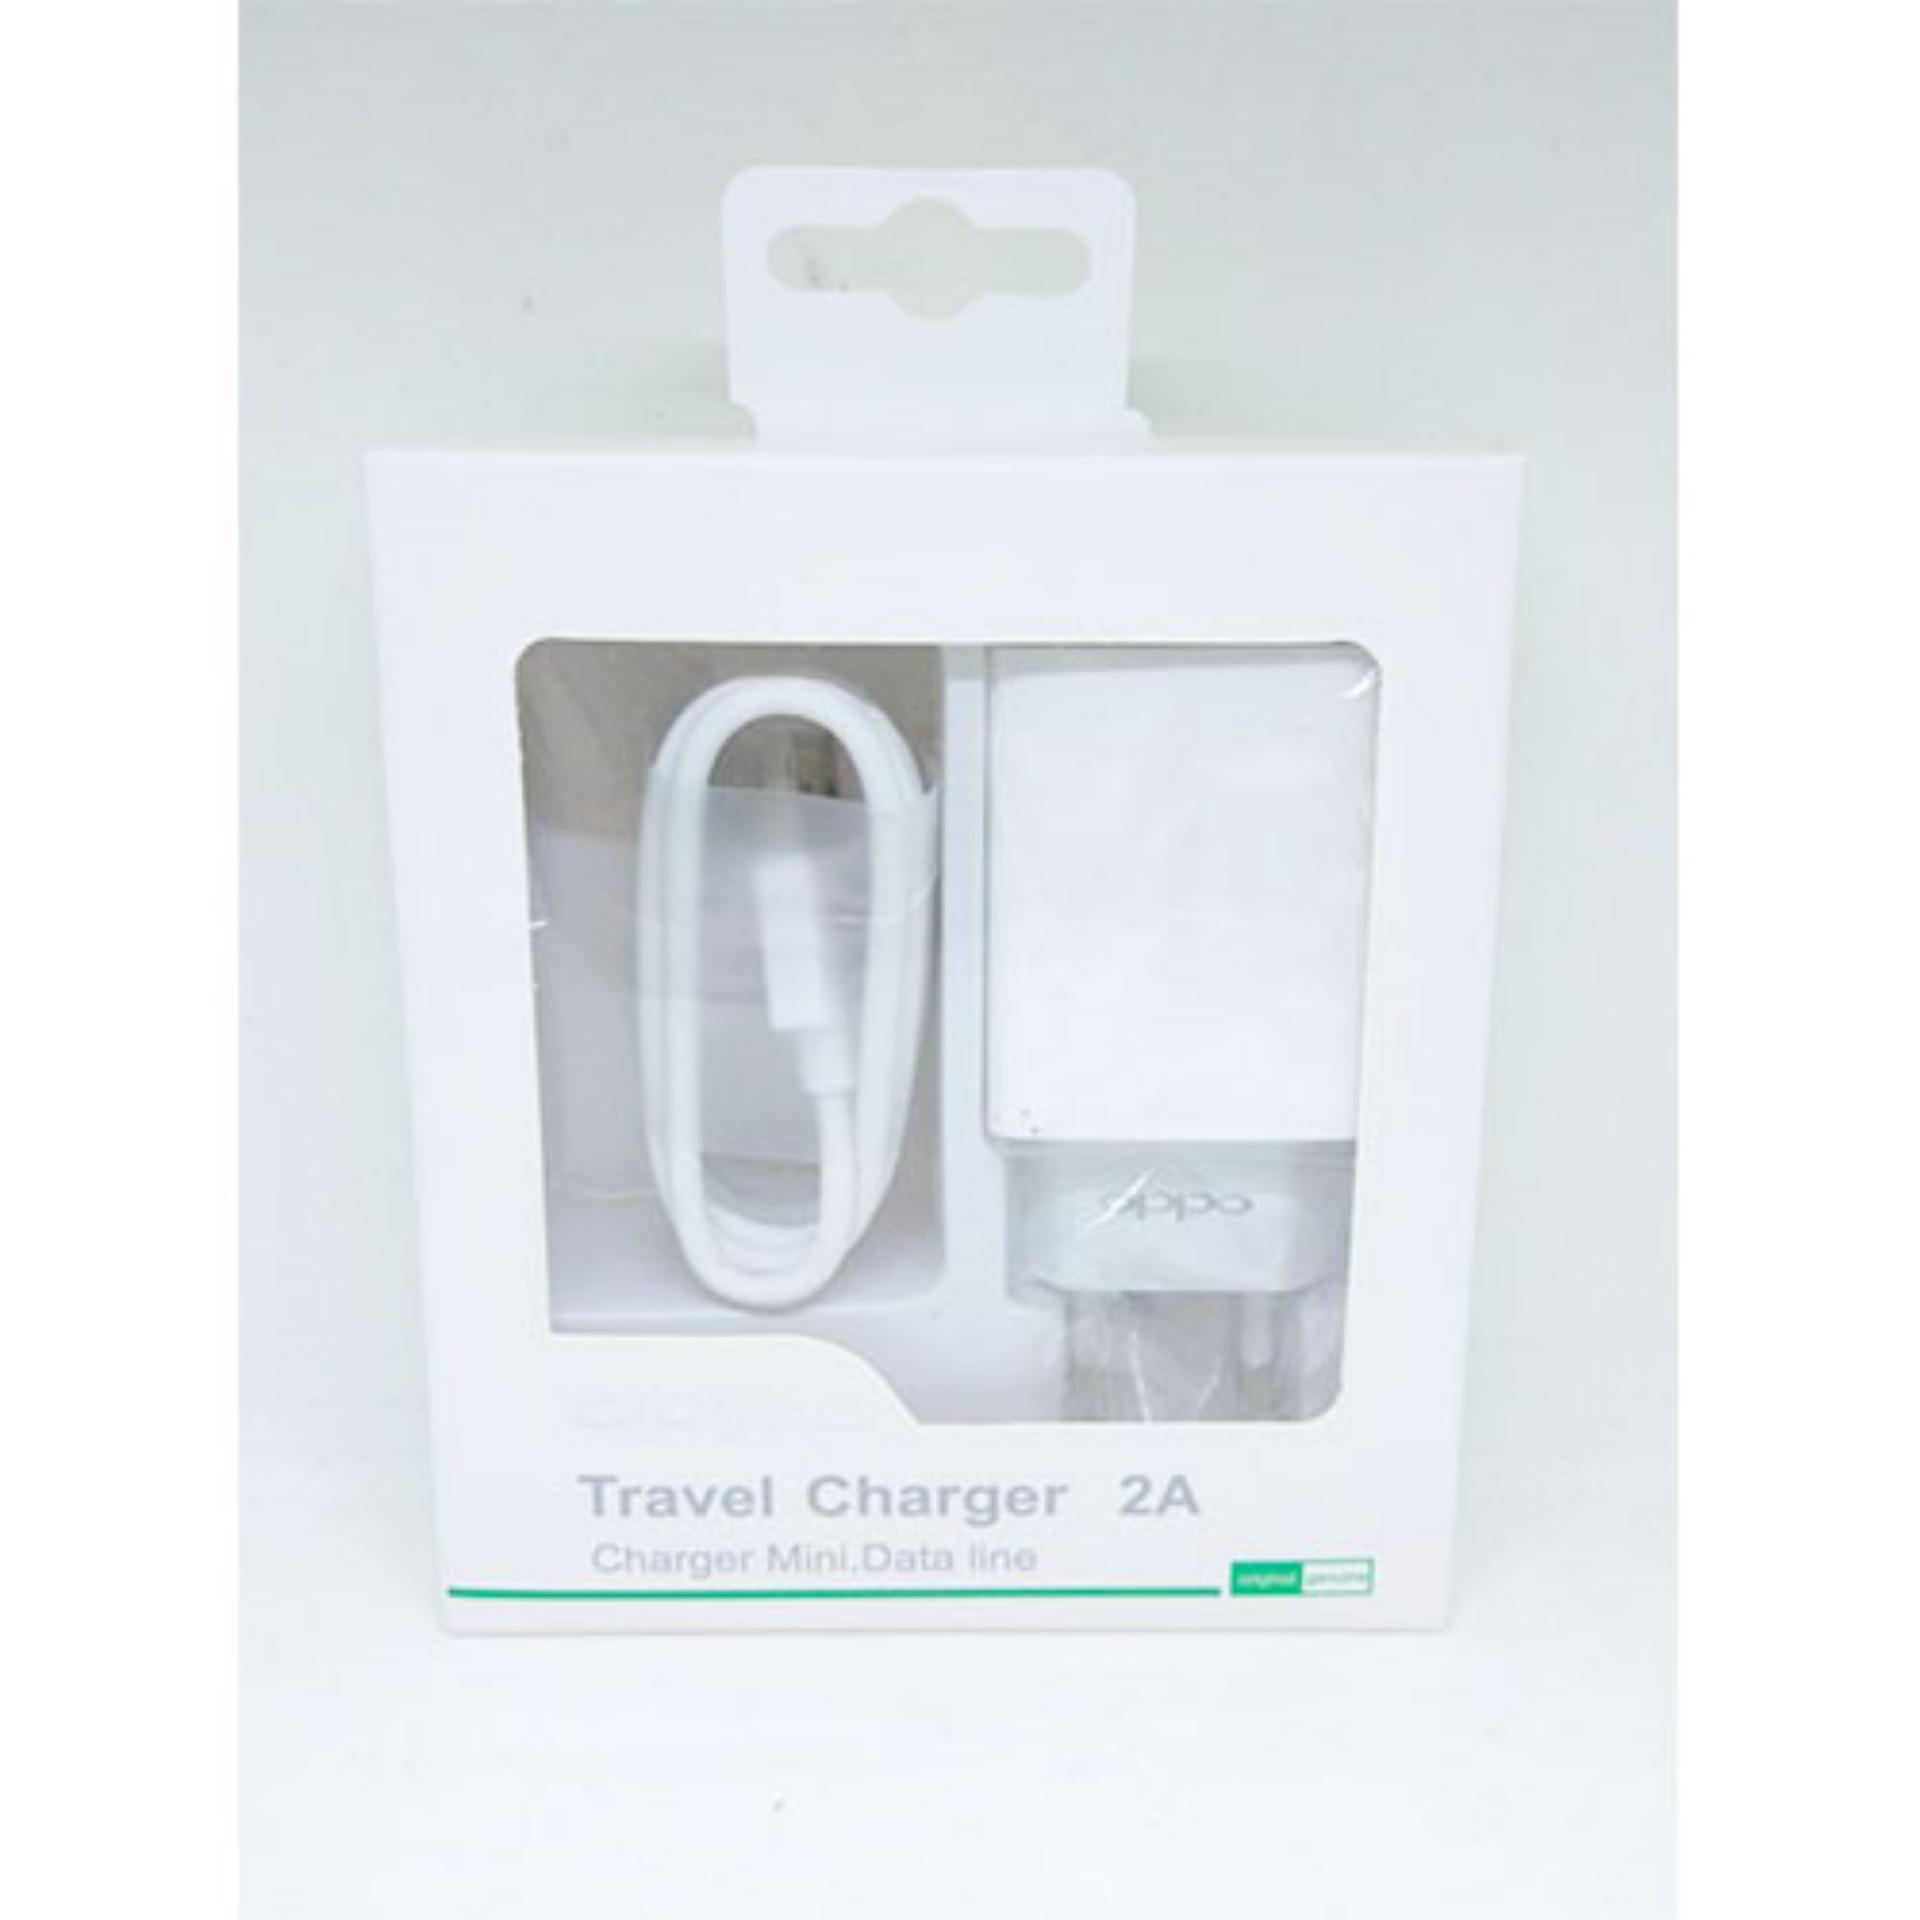 Charger For Oppo 2A Ak933 Micro USB Charge Charging AK 933 Kualitas Original ORI - Bisa Untuk Samsung Galaxy S4 S5 S6 S7 EDGE A3 A5 J1 J2 J3 J5 J7 2016 E5 E7 Mega Mini Young Y Core Grand Duos Prime Ace Note 1 2 3 4 5 On